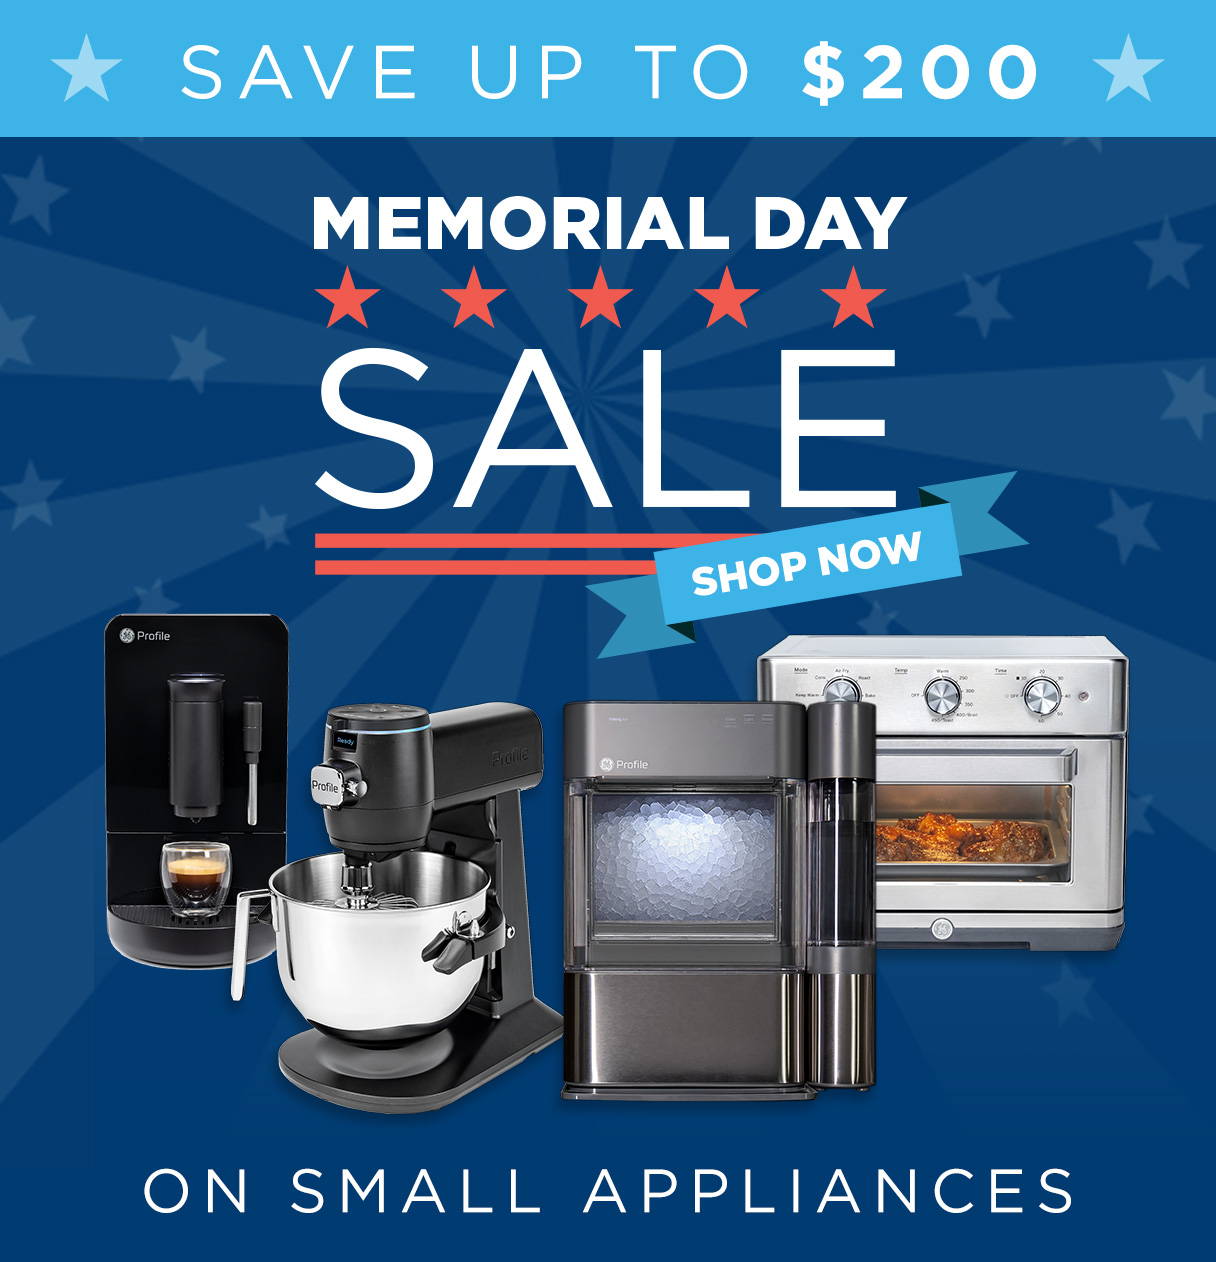 Save up to $200 OFF select small appliances